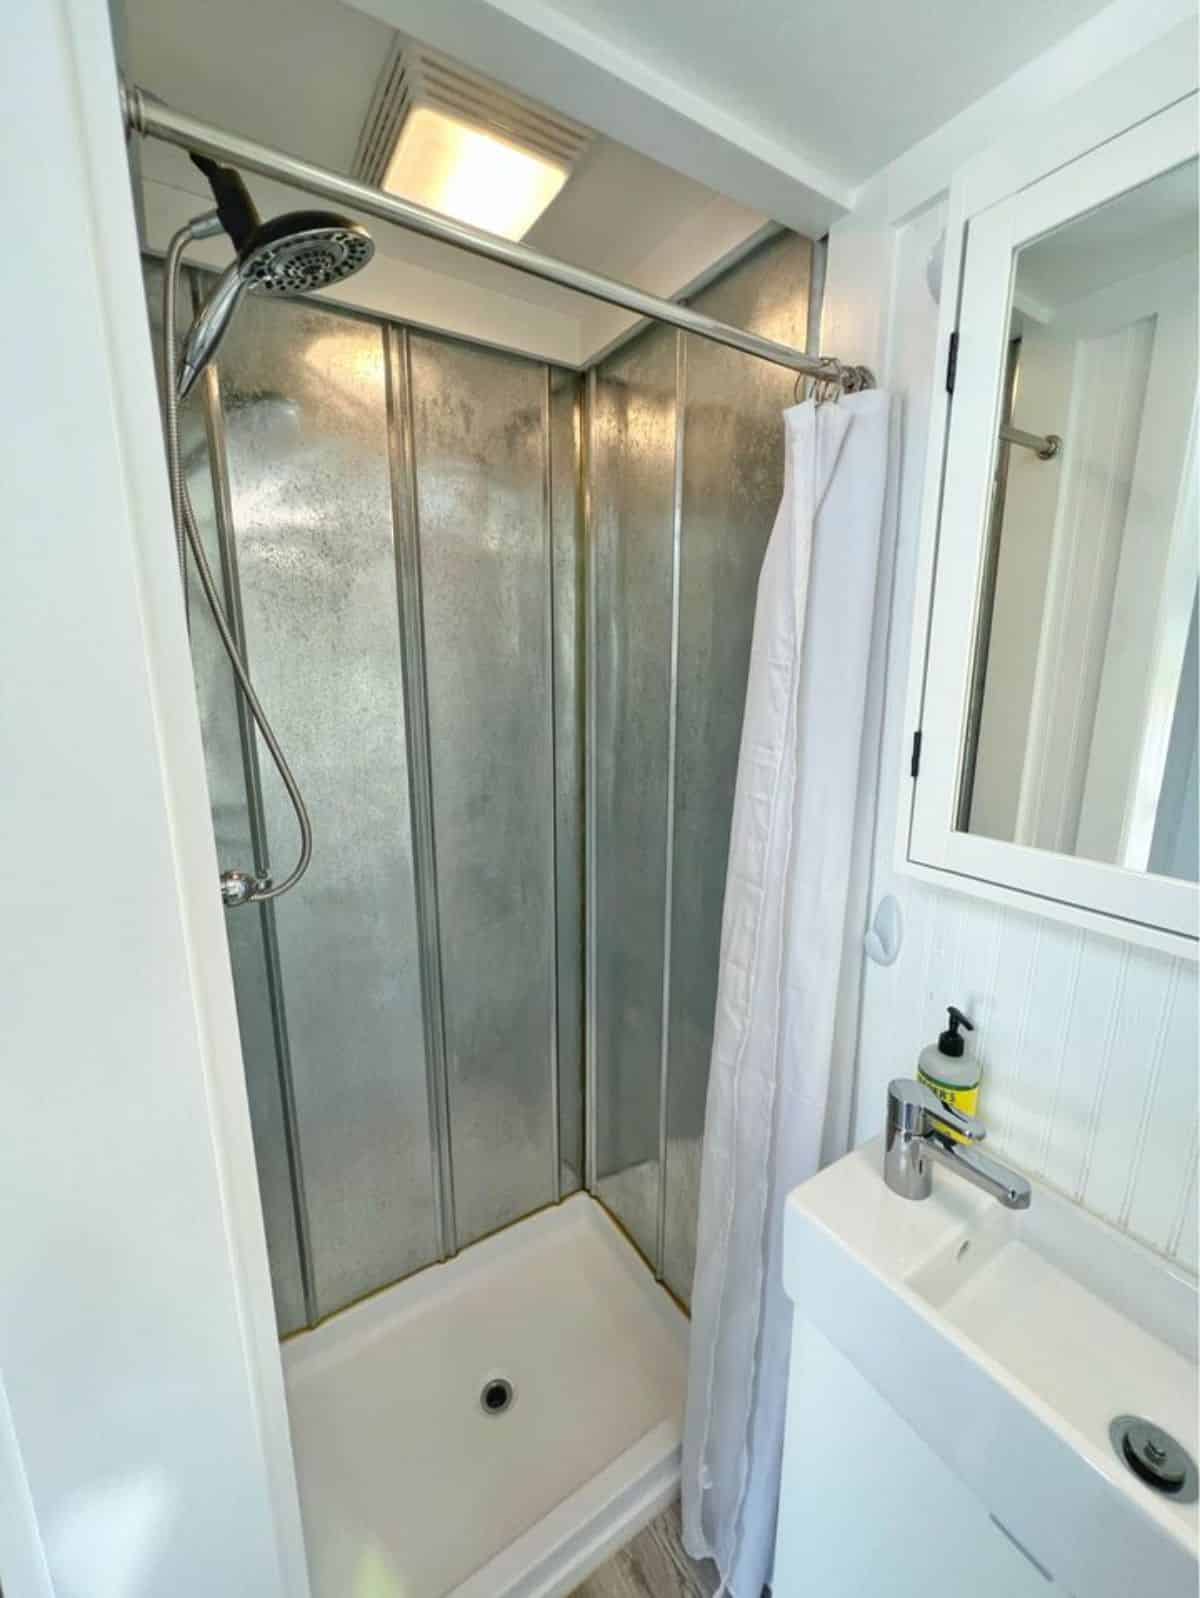 Seperate shower area in bathroom